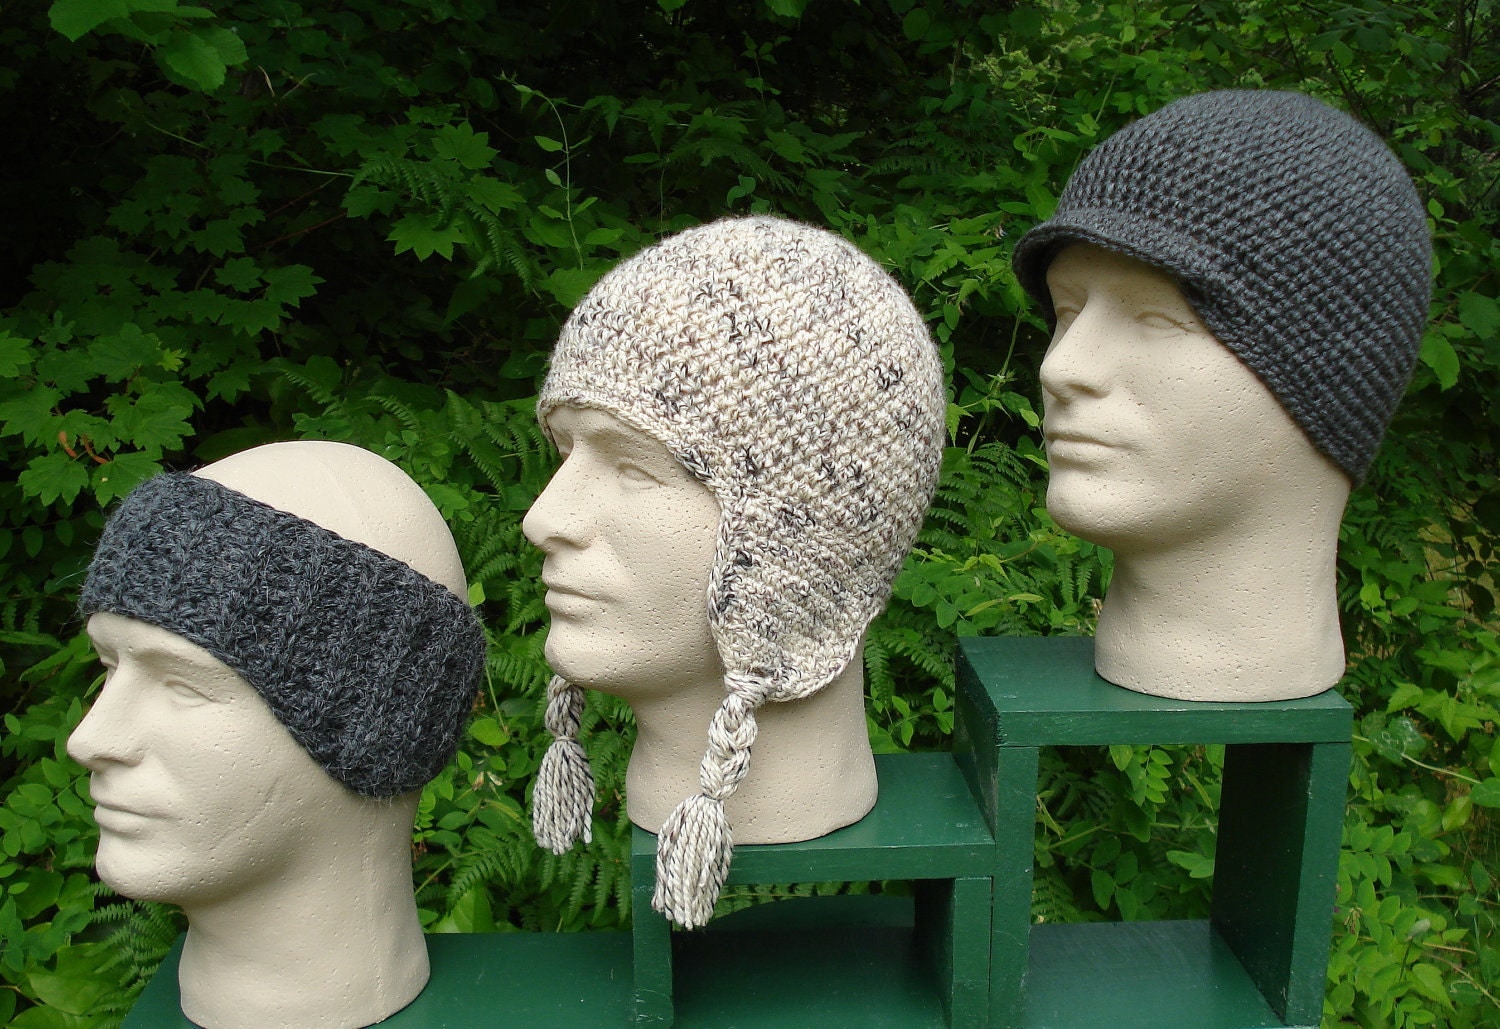 HAND CROCHETED HATS FOR MEN AND WOMEN - ELEGANT LACE, TRINKETS AND